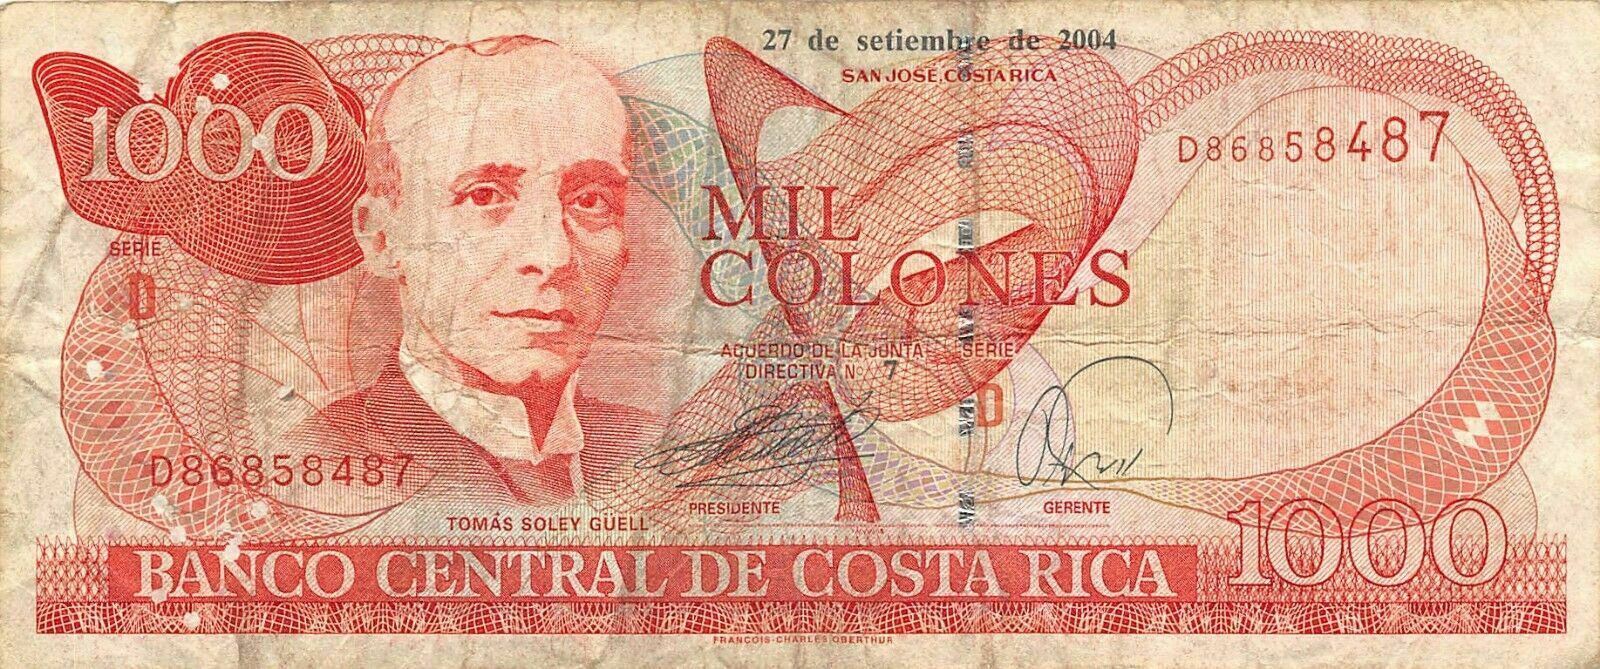 Costa Rica   1000  Colones  27.9.10.2004  Series  D 7  Circulated Banknote S518f